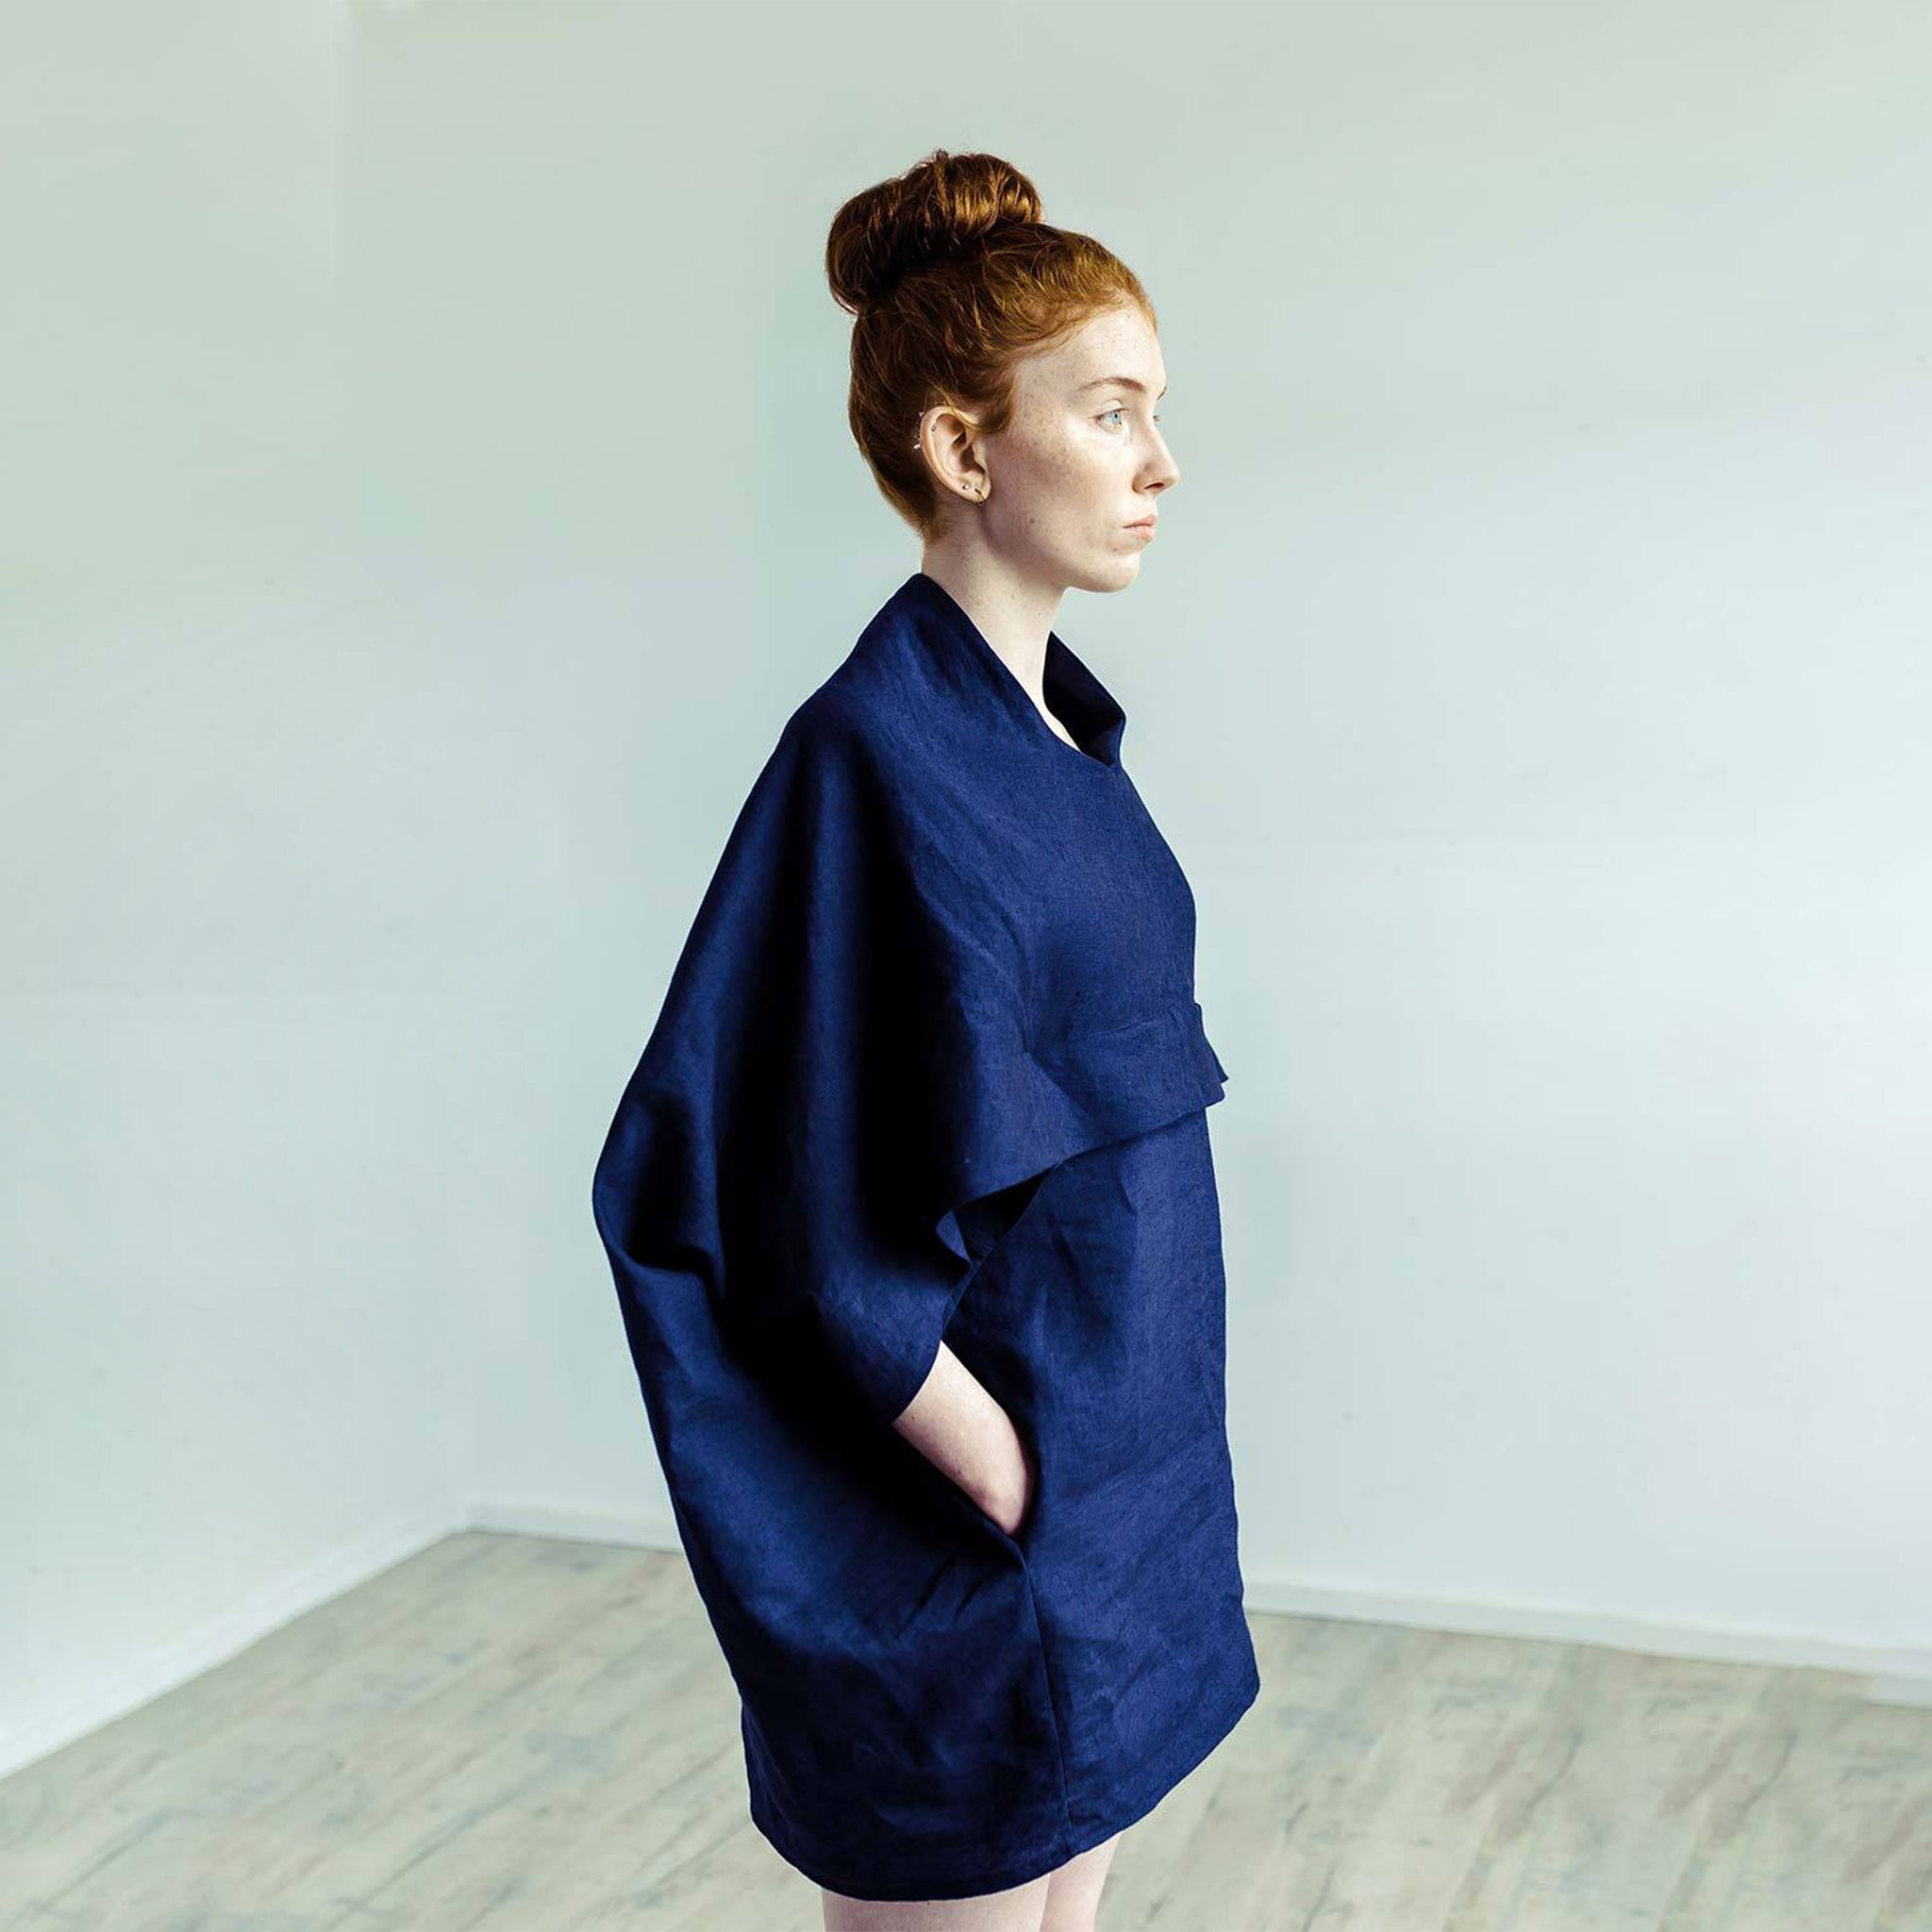 Red hair woman wearing The Costume Room navy blue 100% Pure Irish Linen Cocoon dress with pockets